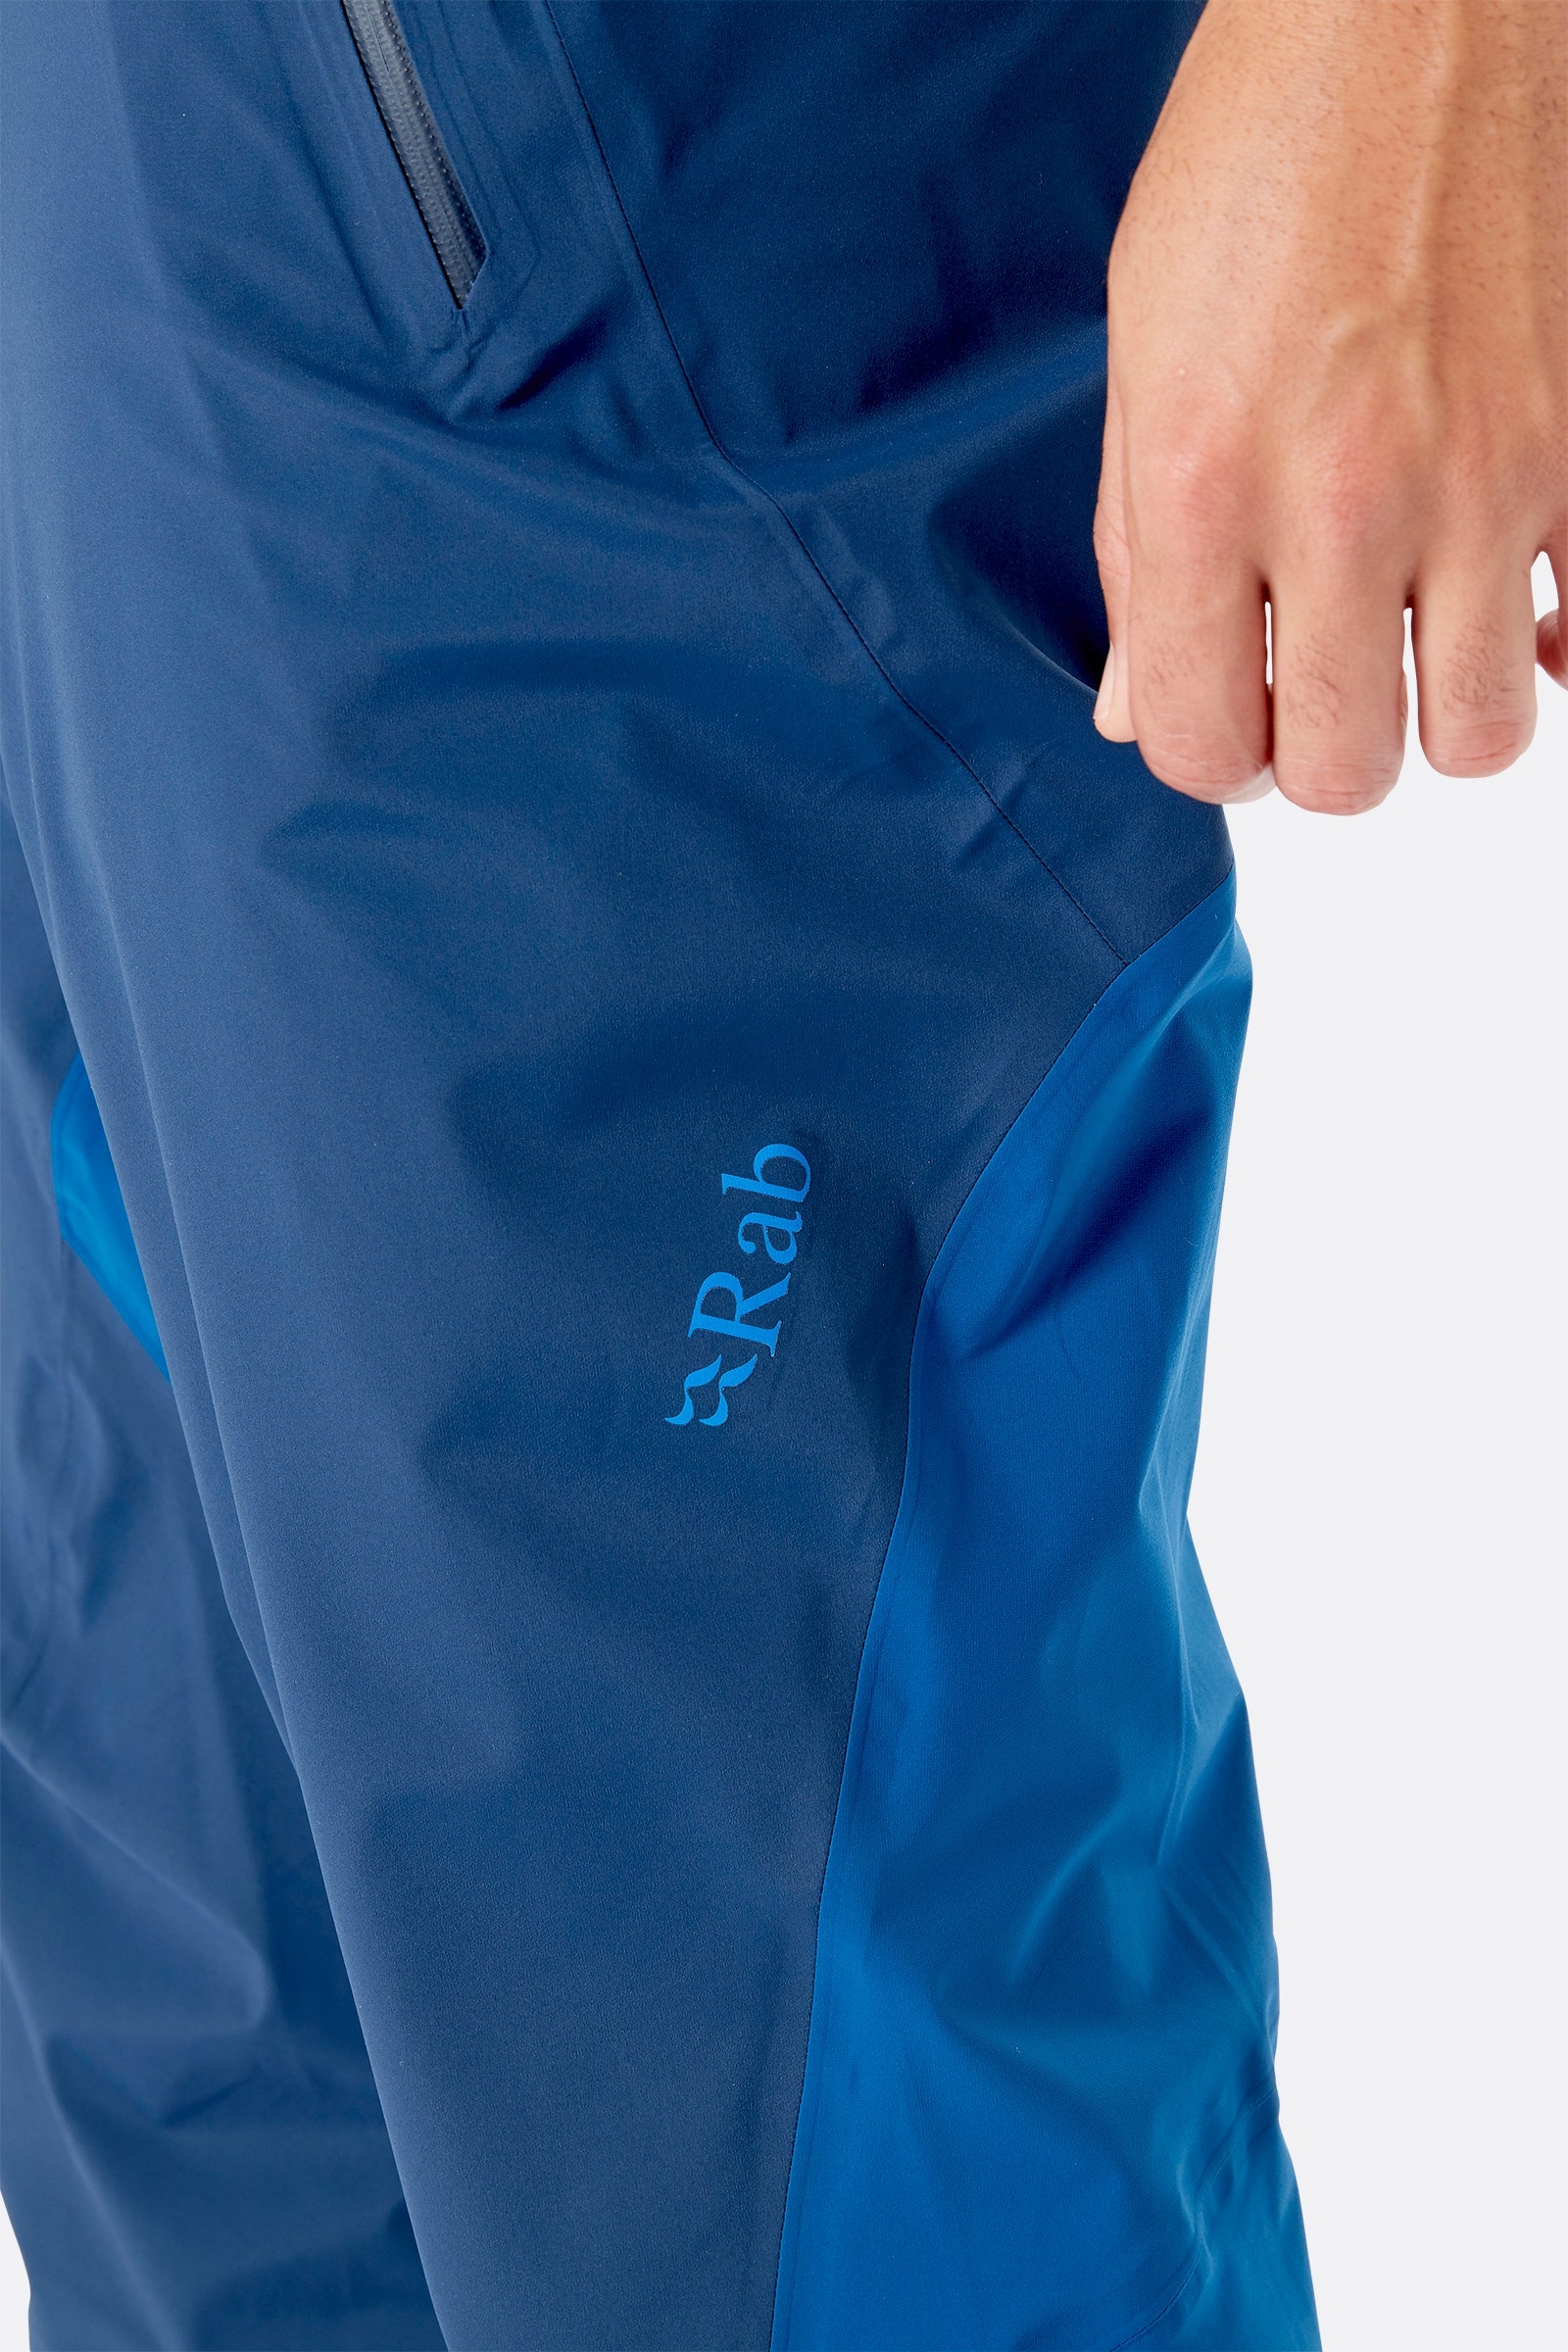 Rab Men's Kinetic 2.0 Pants Various Sizes and Colors